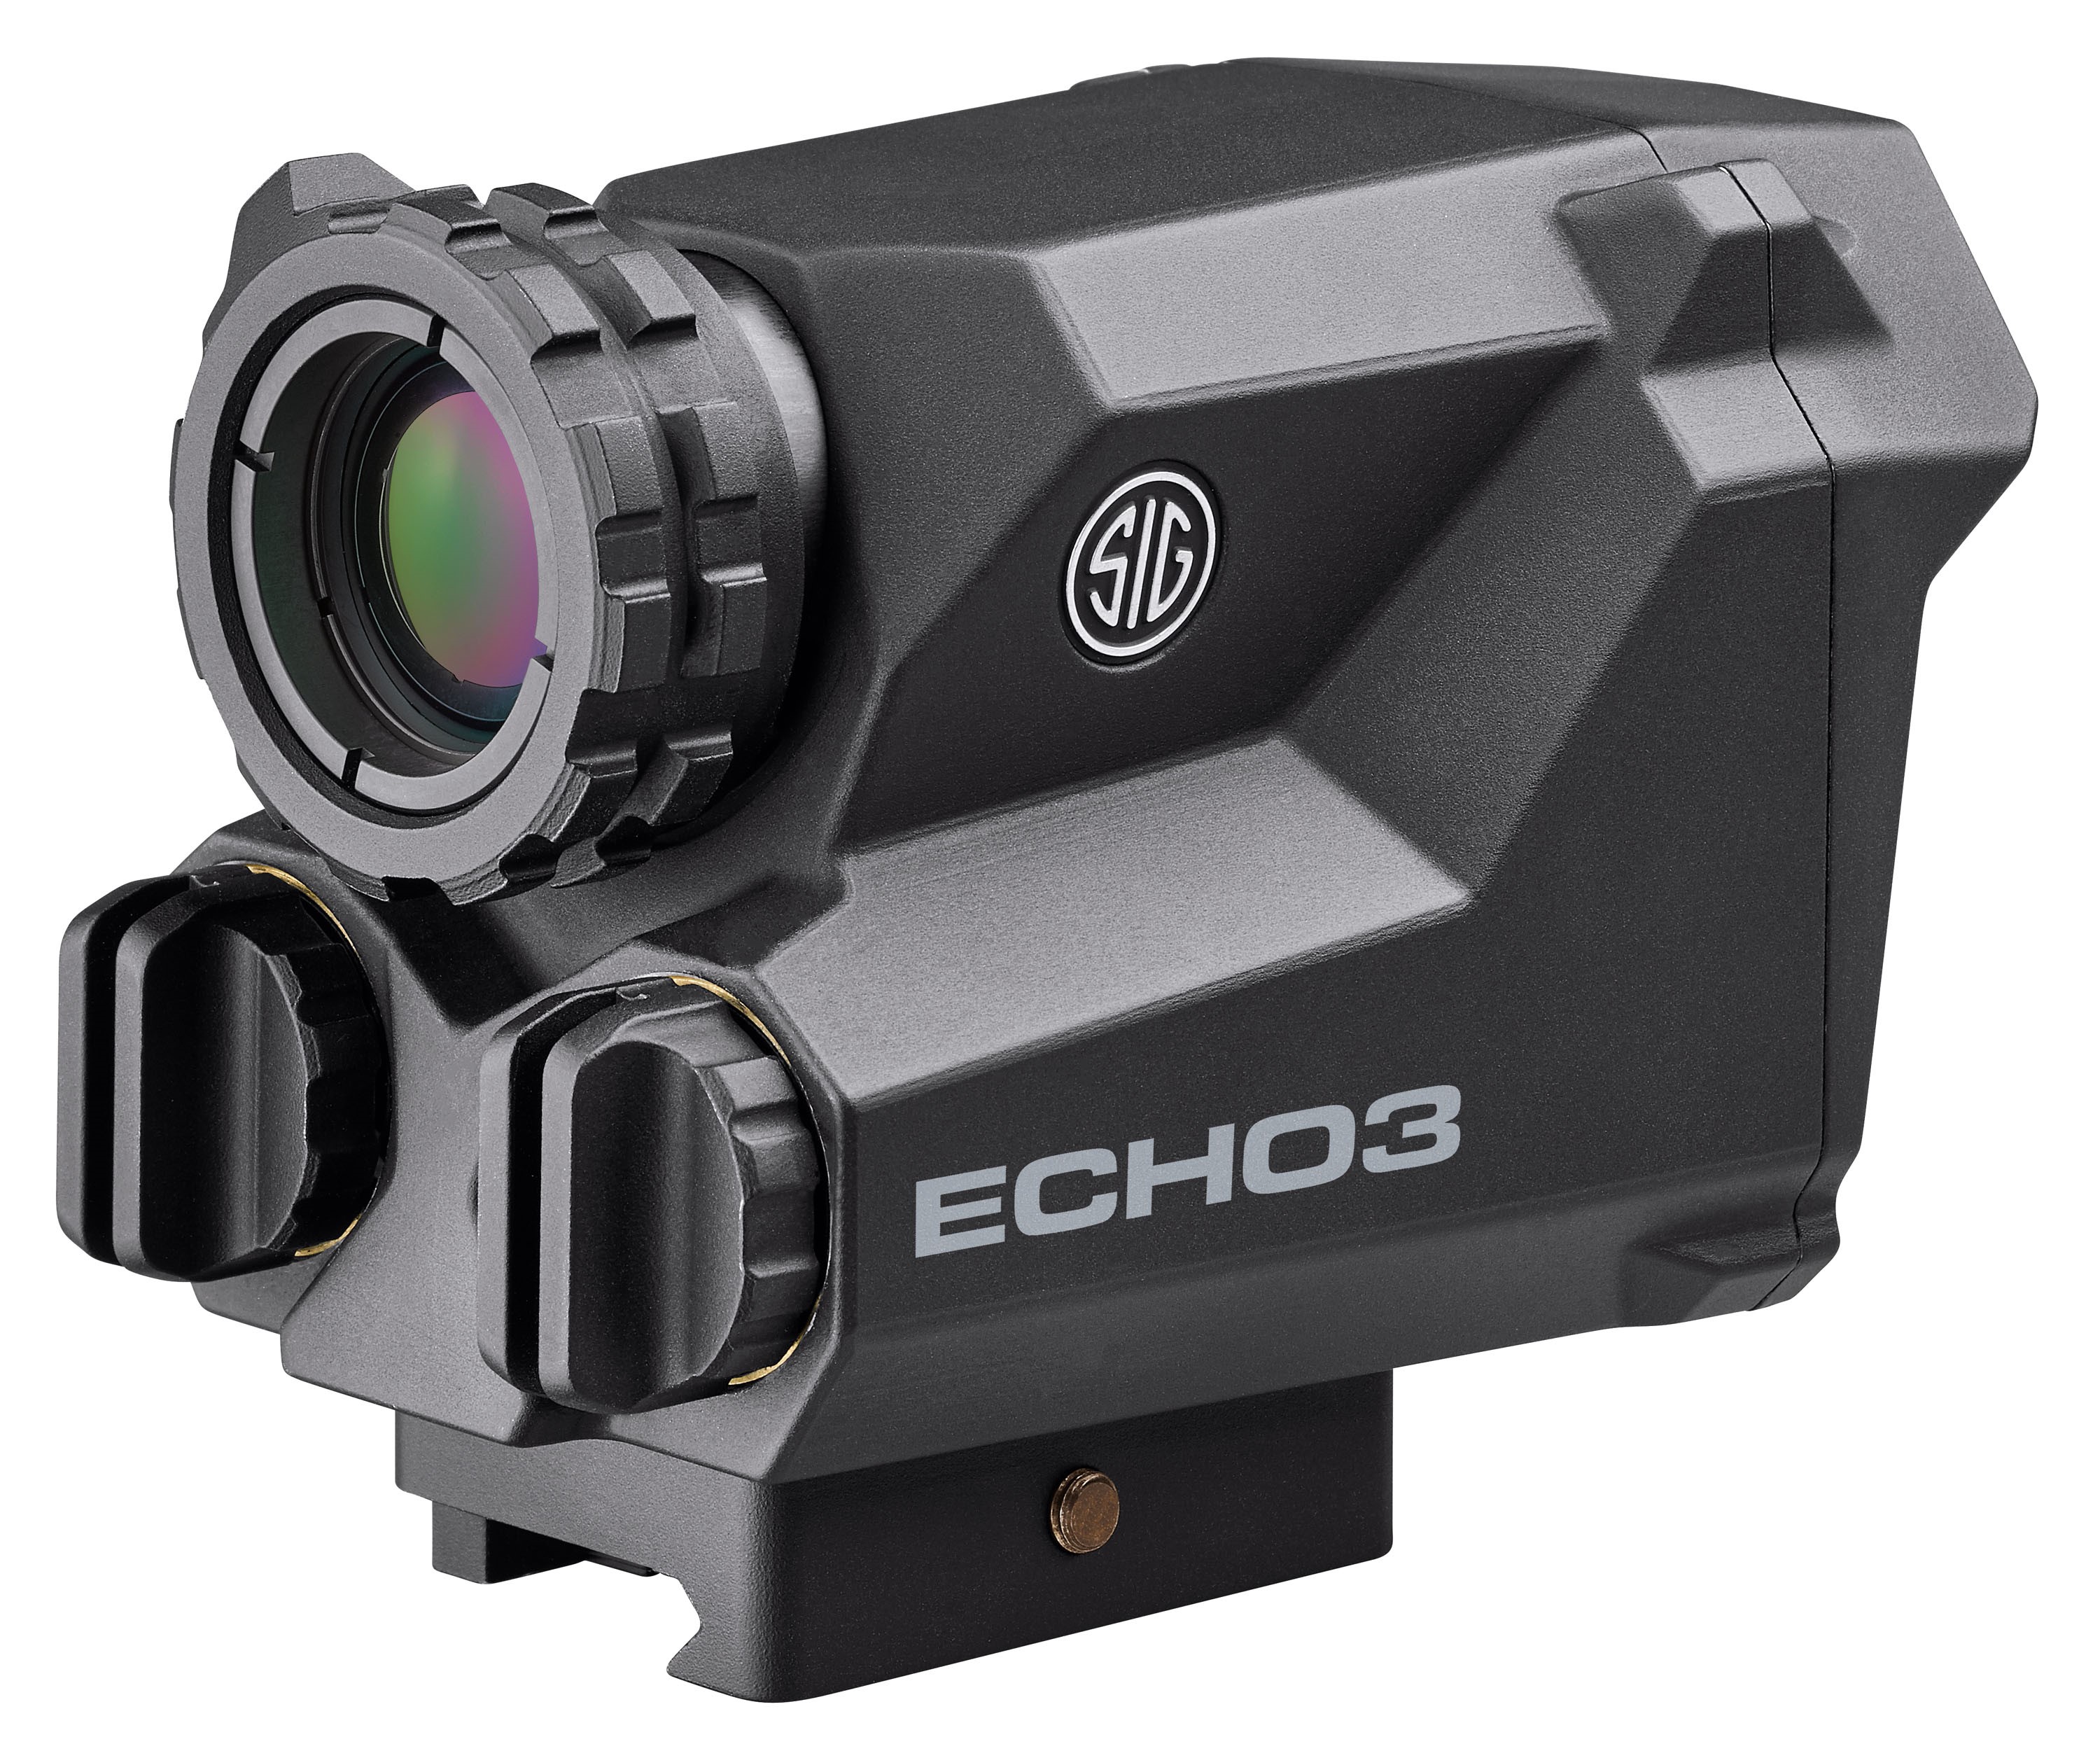 SIG announces ECHO 3 thermal weapon sight